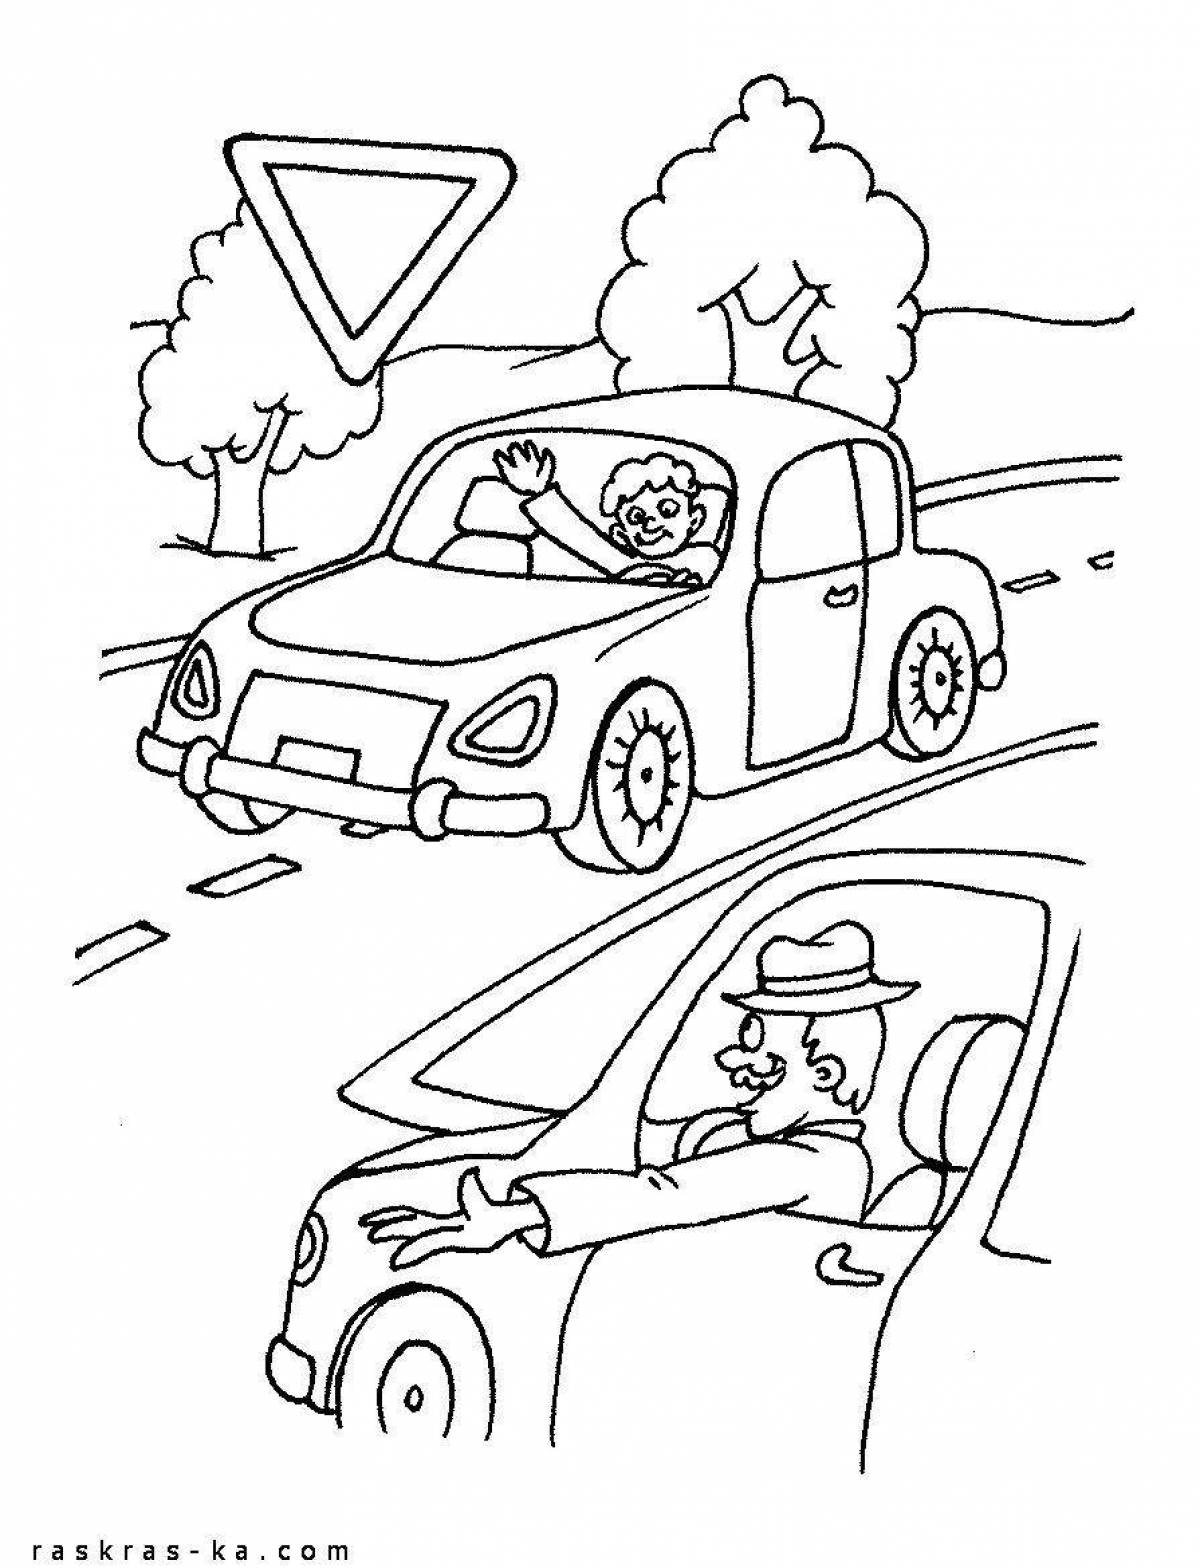 Radiant coloring page of my dad and i for safe roads